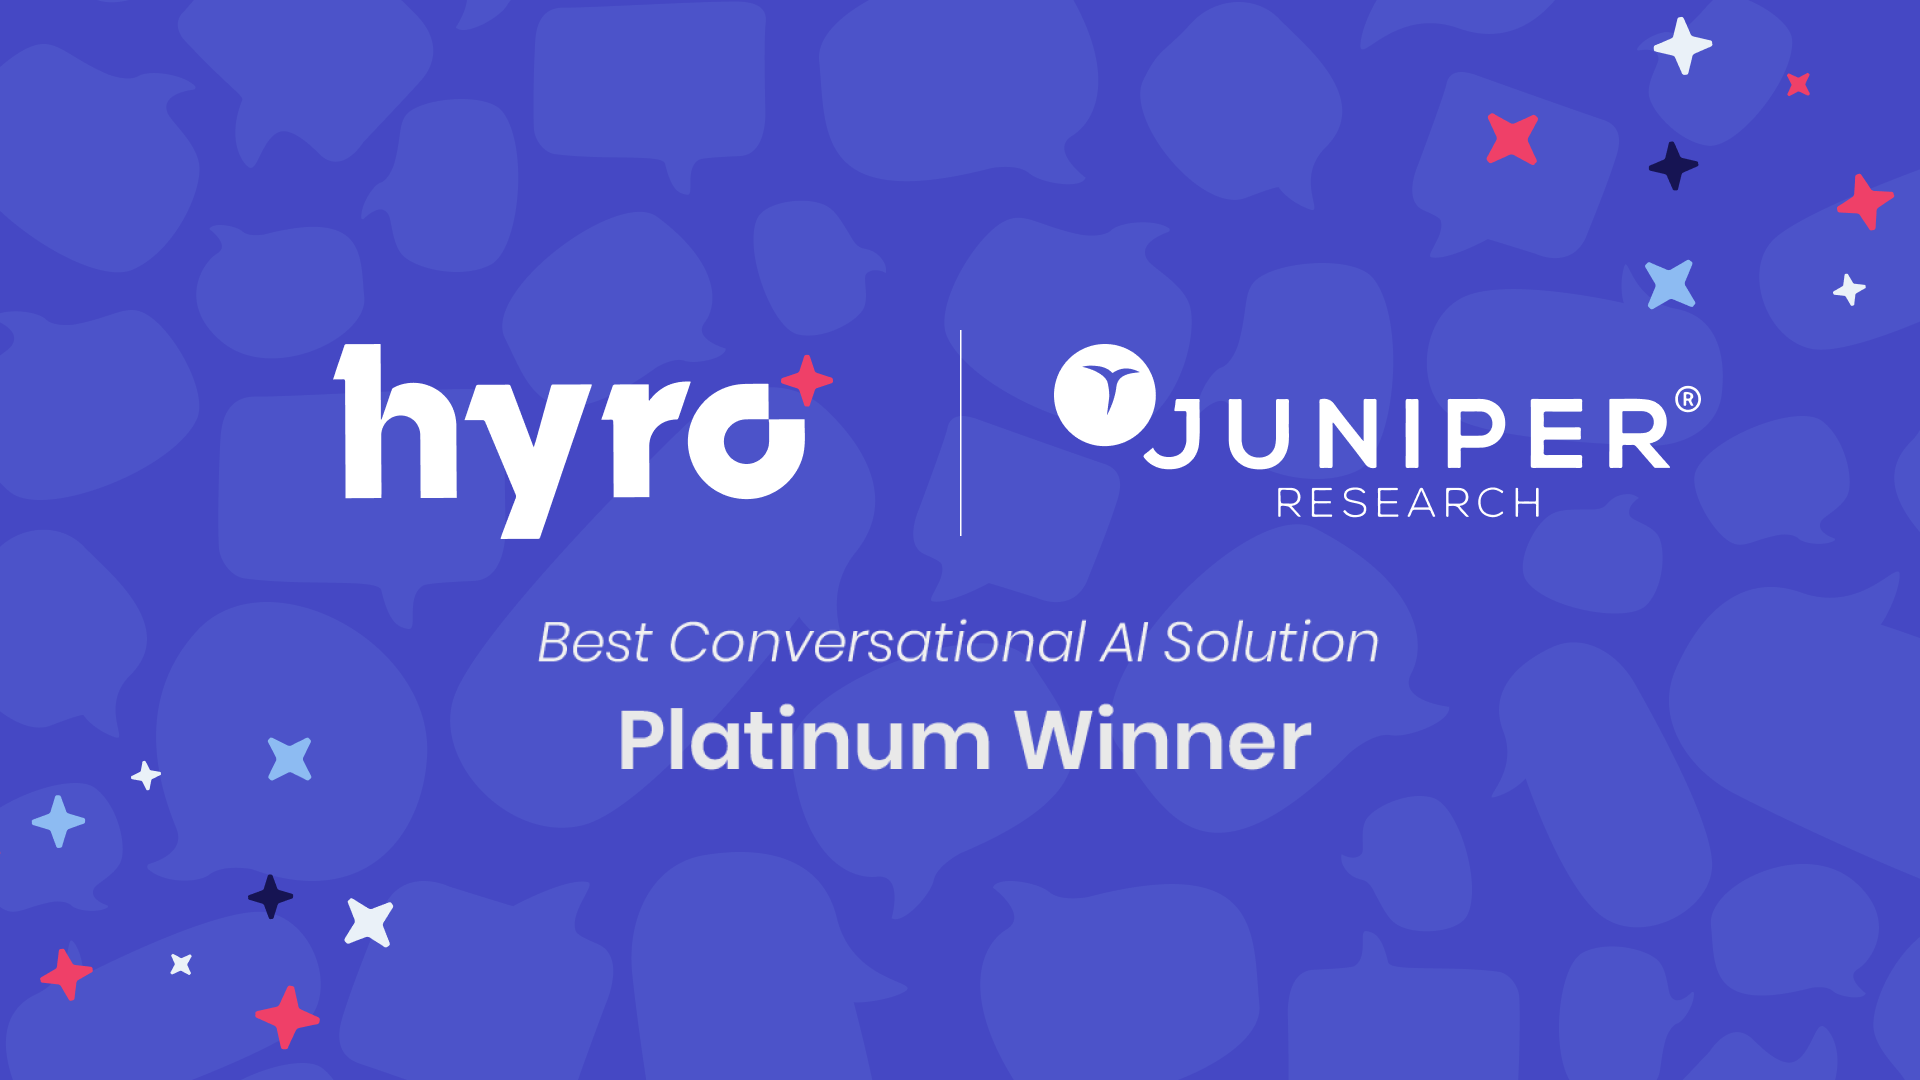 Hyro Named Best Conversational AI Solution for 2022 by Juniper Research